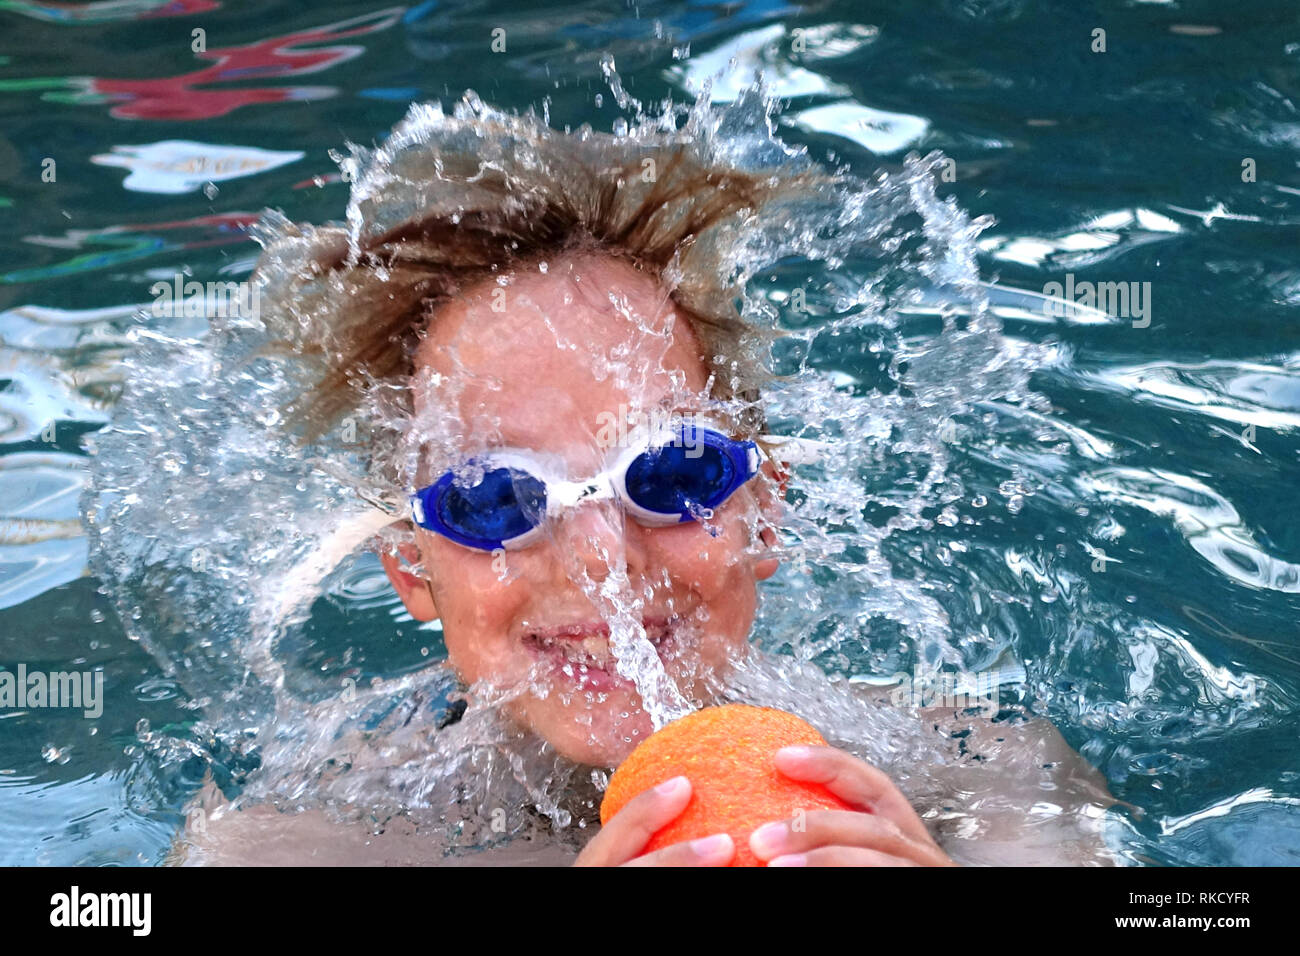 Anyoung boy gets splashed in the face with pool water coming out of a floatable noodle. Stock Photo